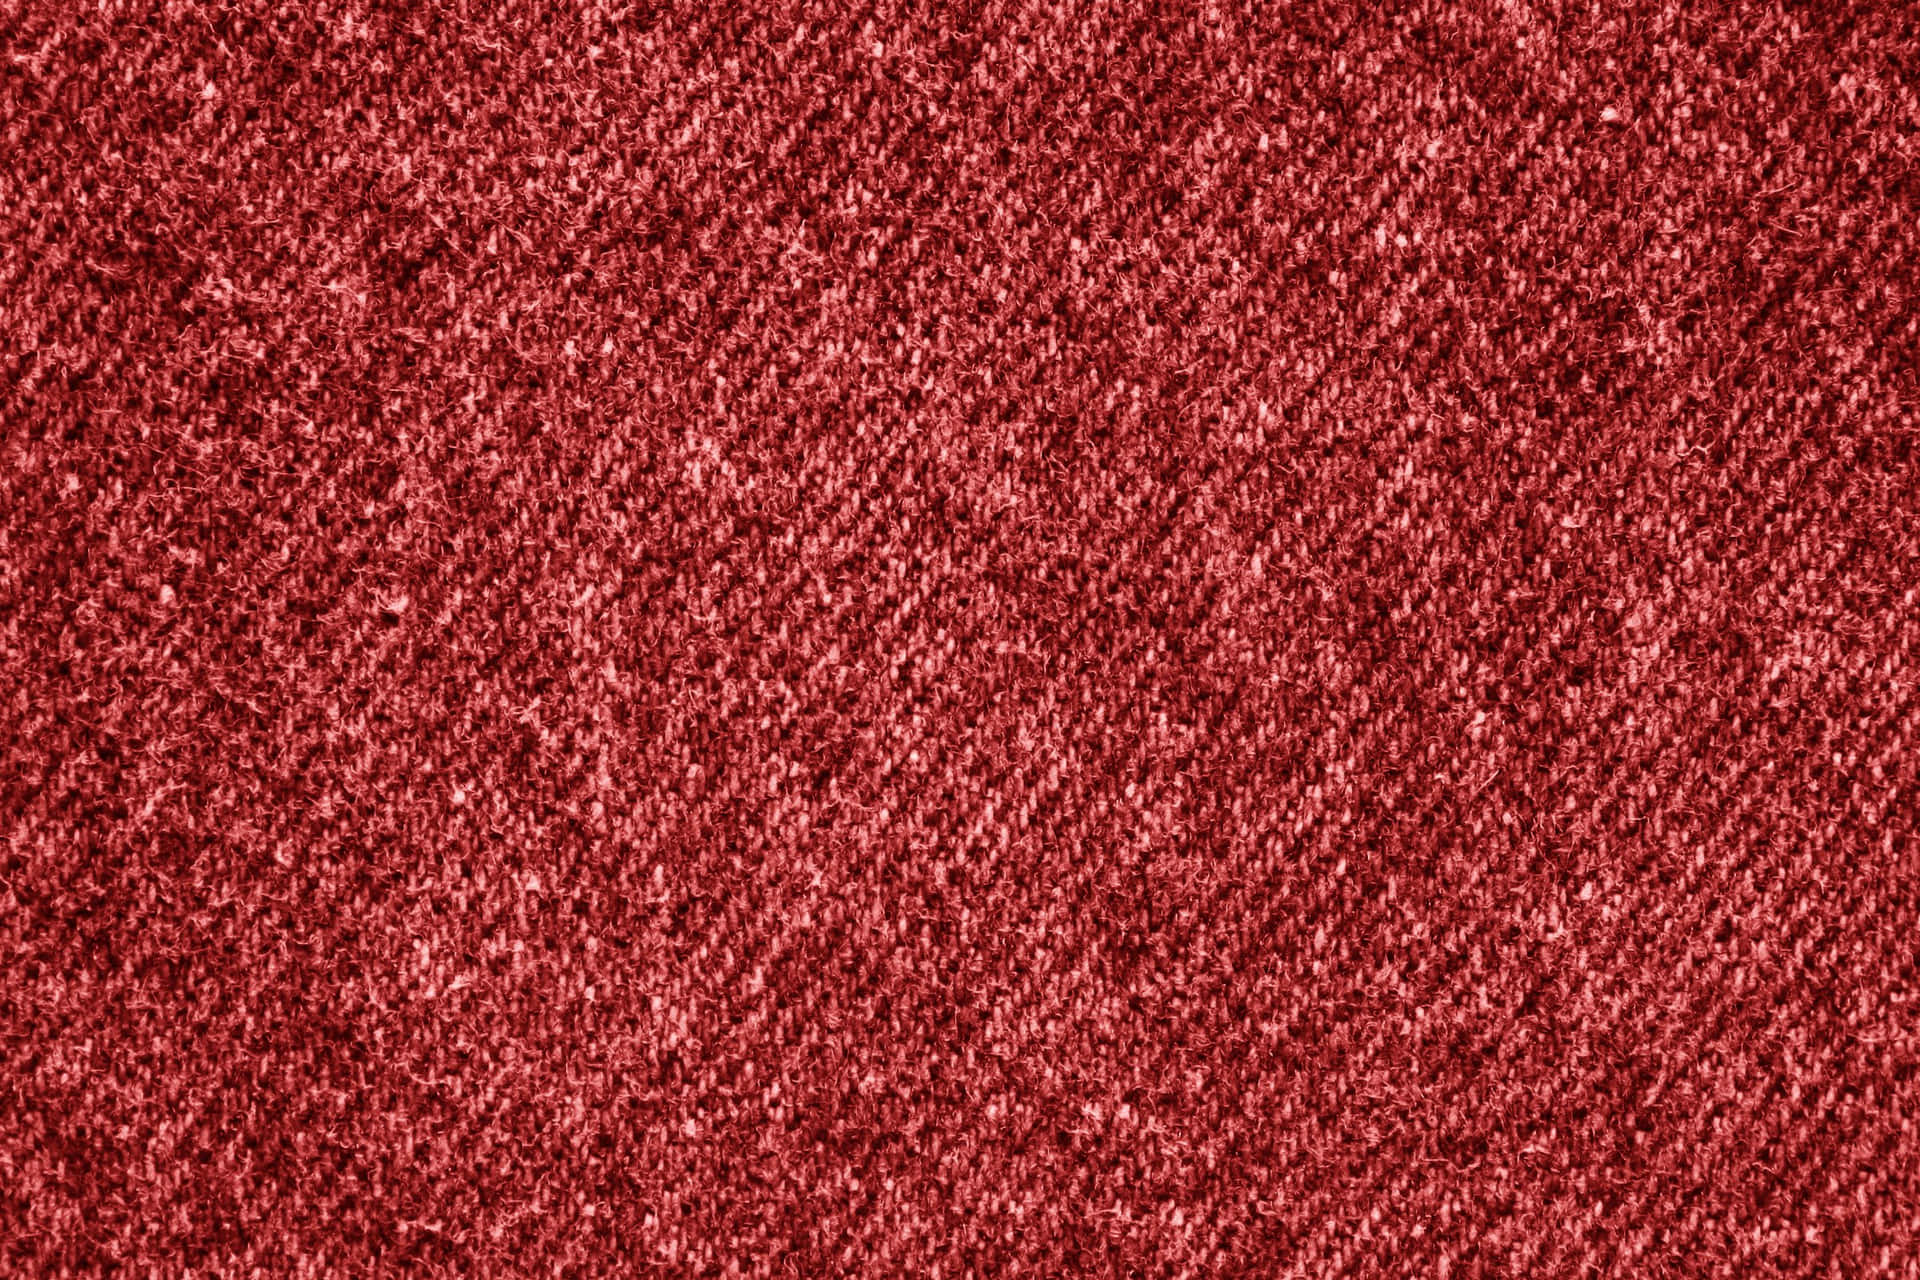 Fabric Texture Pictures Red Wool